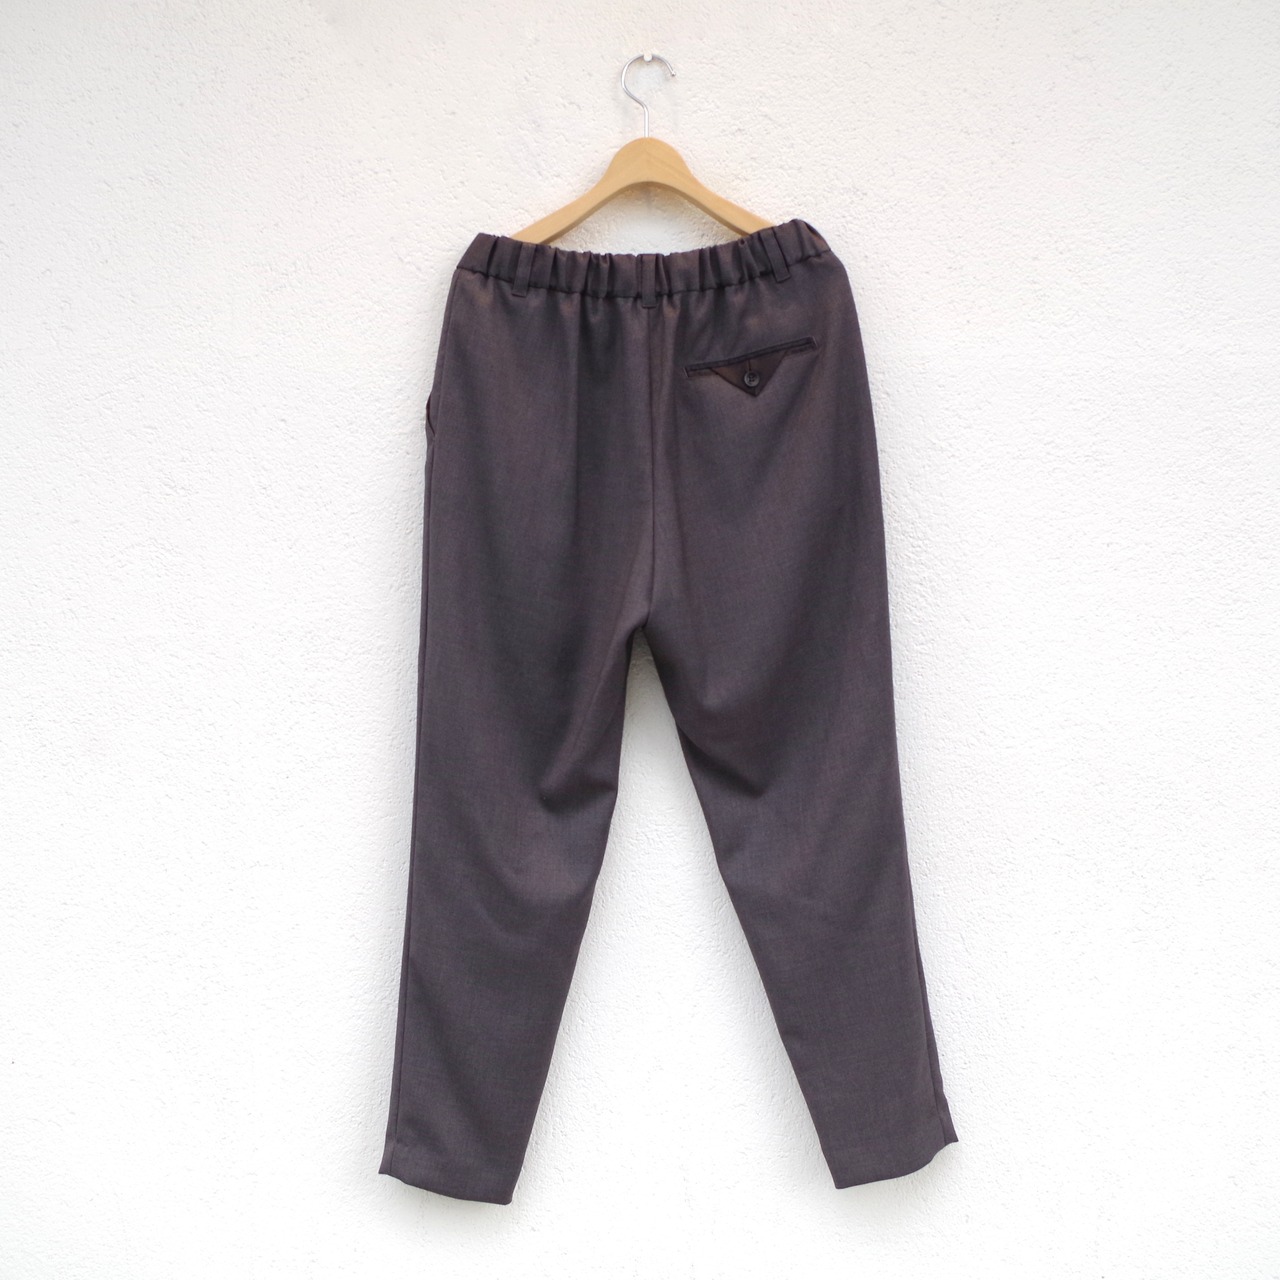 SIWALY  tapered easy pants